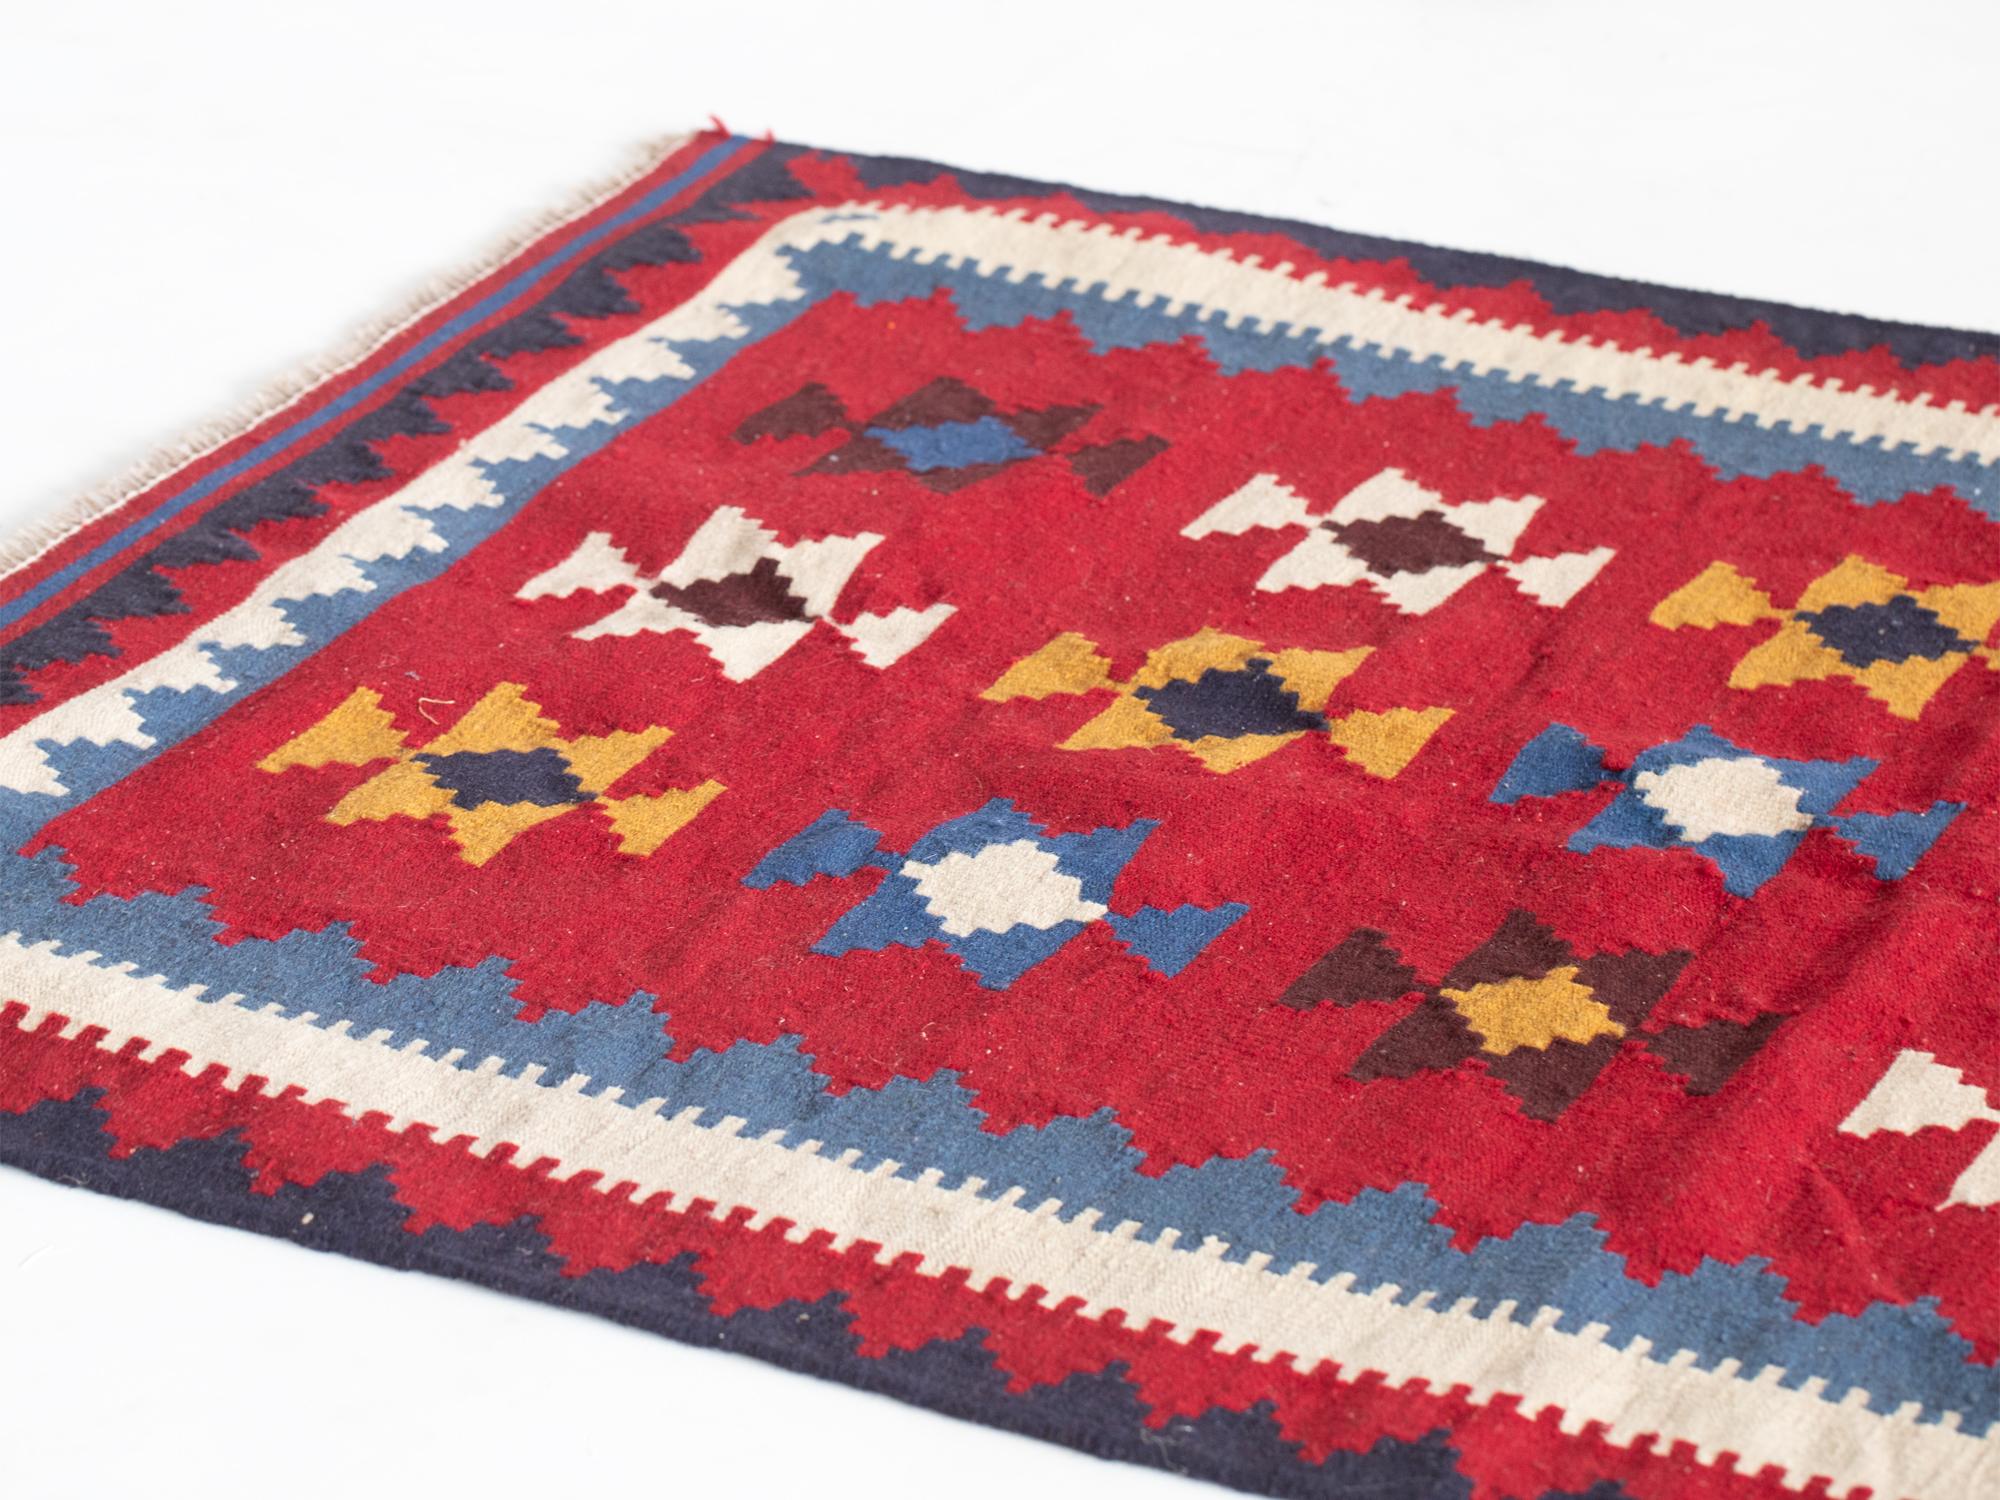 A hand-knotted Persian Qashqai kilim rug, mid-late 20C.

Stock ref. #2215

186 x 120 cm

6'1 x 3'11